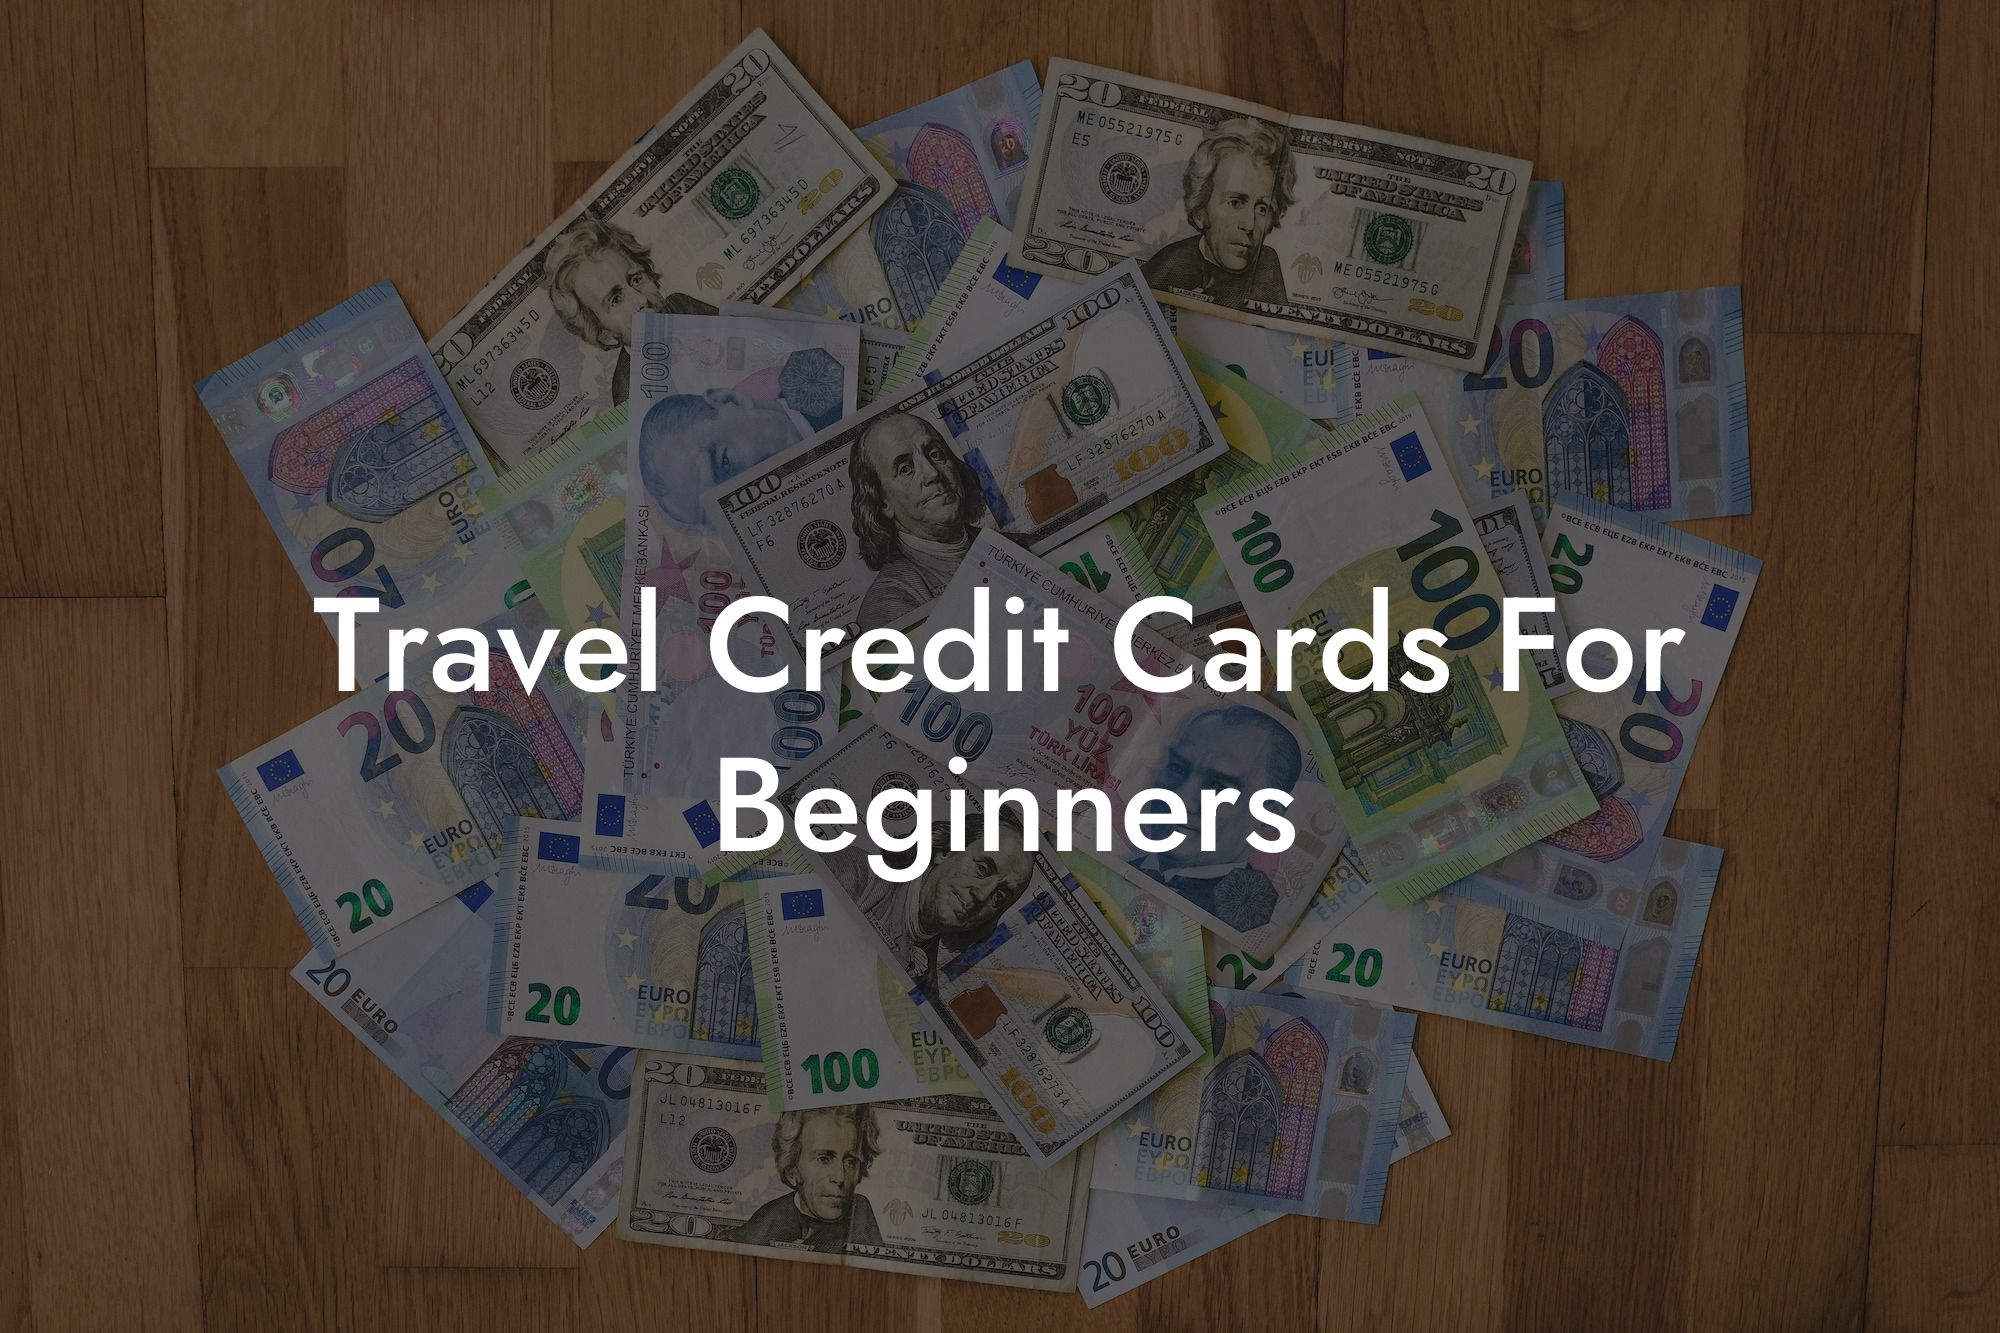 Travel Credit Cards For Beginners